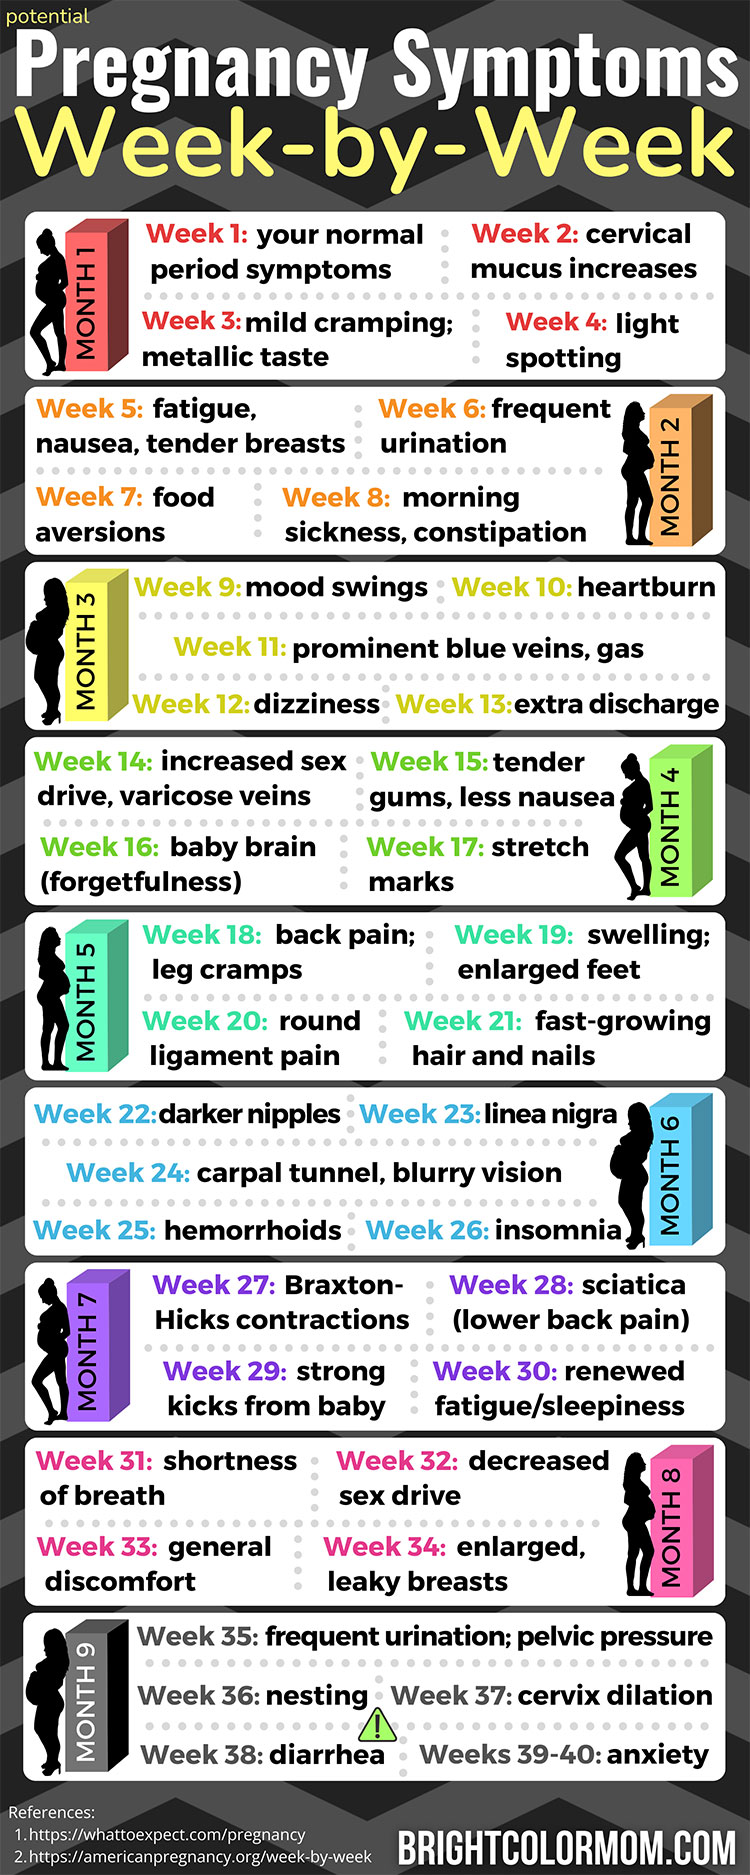 infographic detailing all the possible symptoms a woman can experience throughout pregnancy